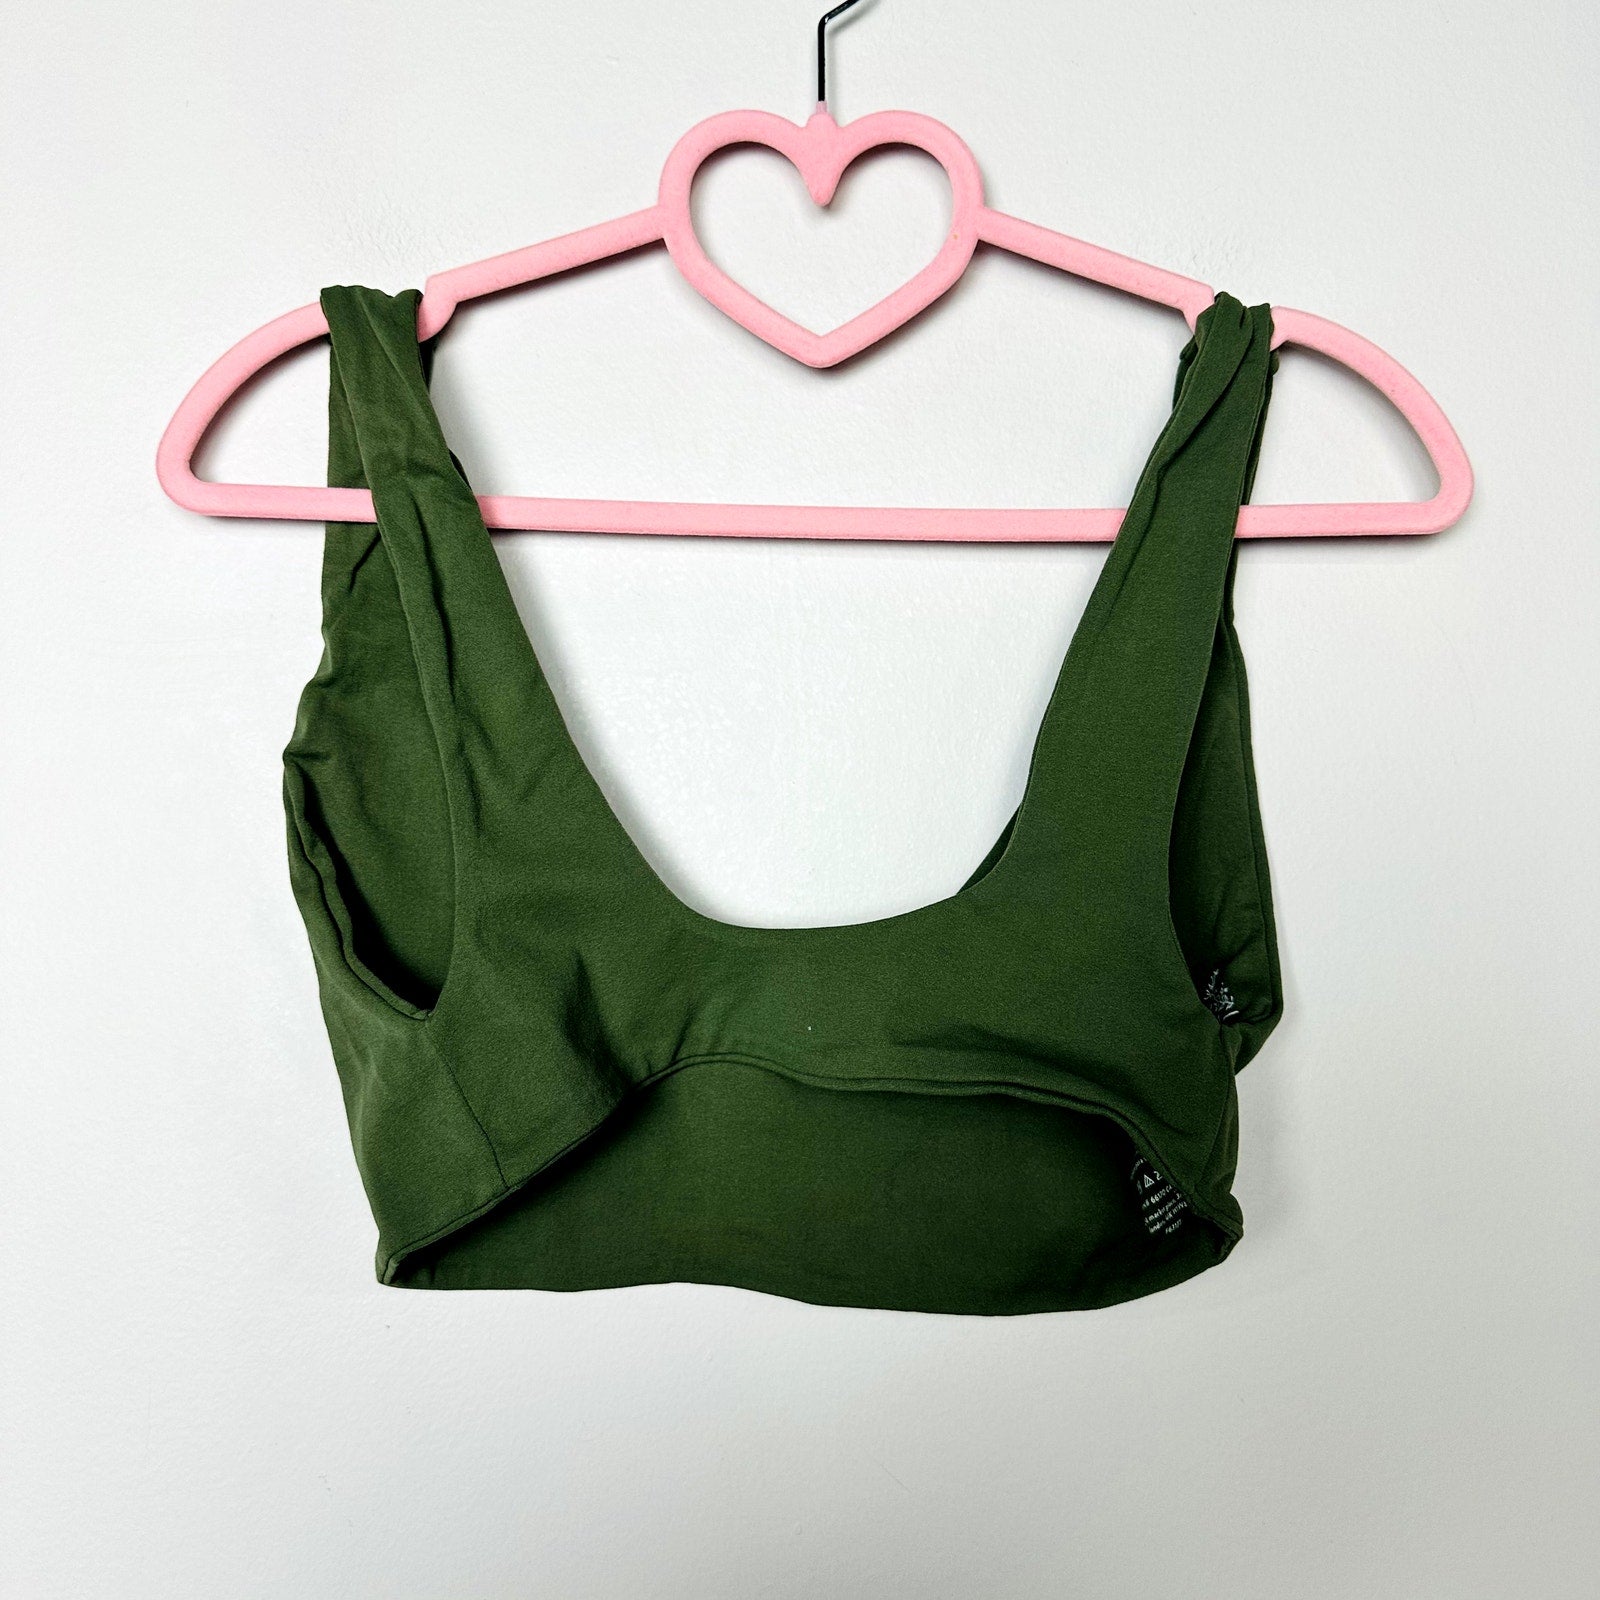 Free People NWOT Square Neck Bra Army Green Size M/L